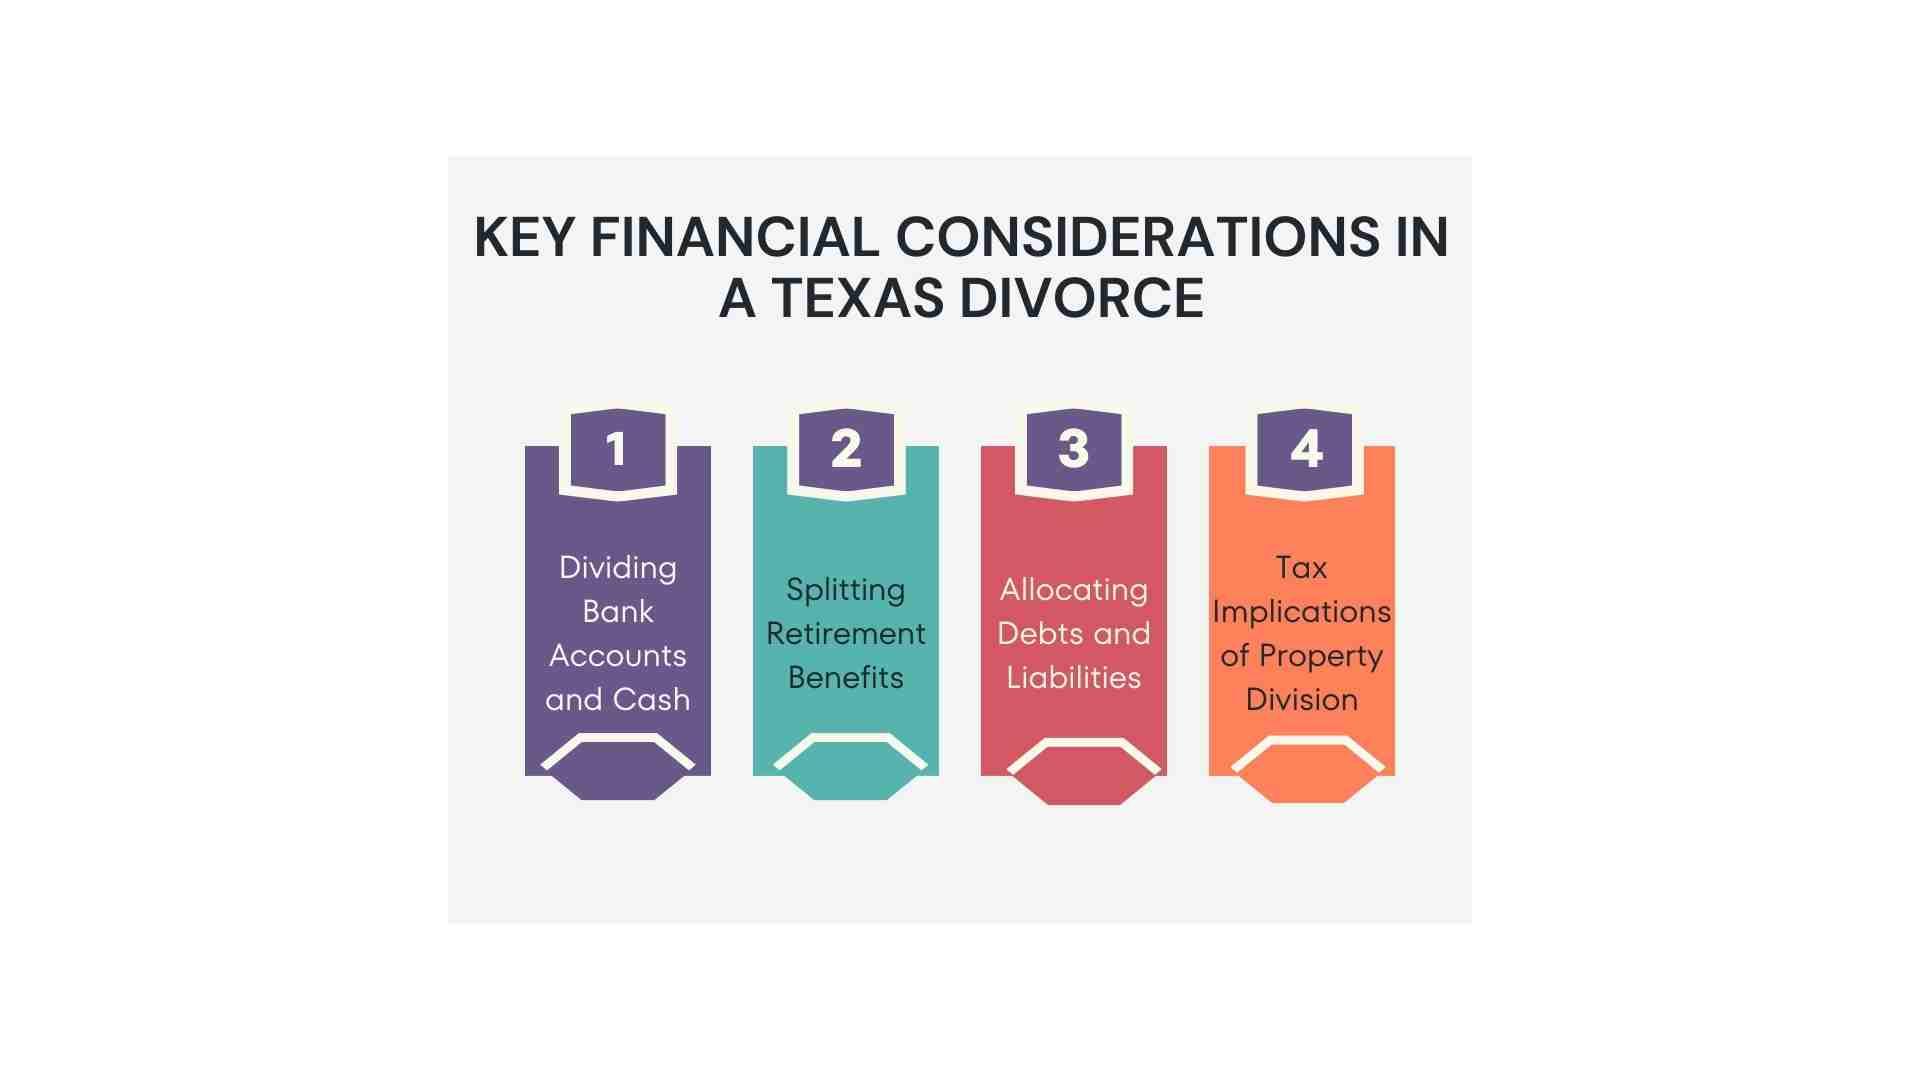 Infographic showing four key insights into a Texas divorce: 1. dividing bank accounts and cash, 2. splitting retirement benefits, 3. allocating debts and liabilities, 4. tax implications